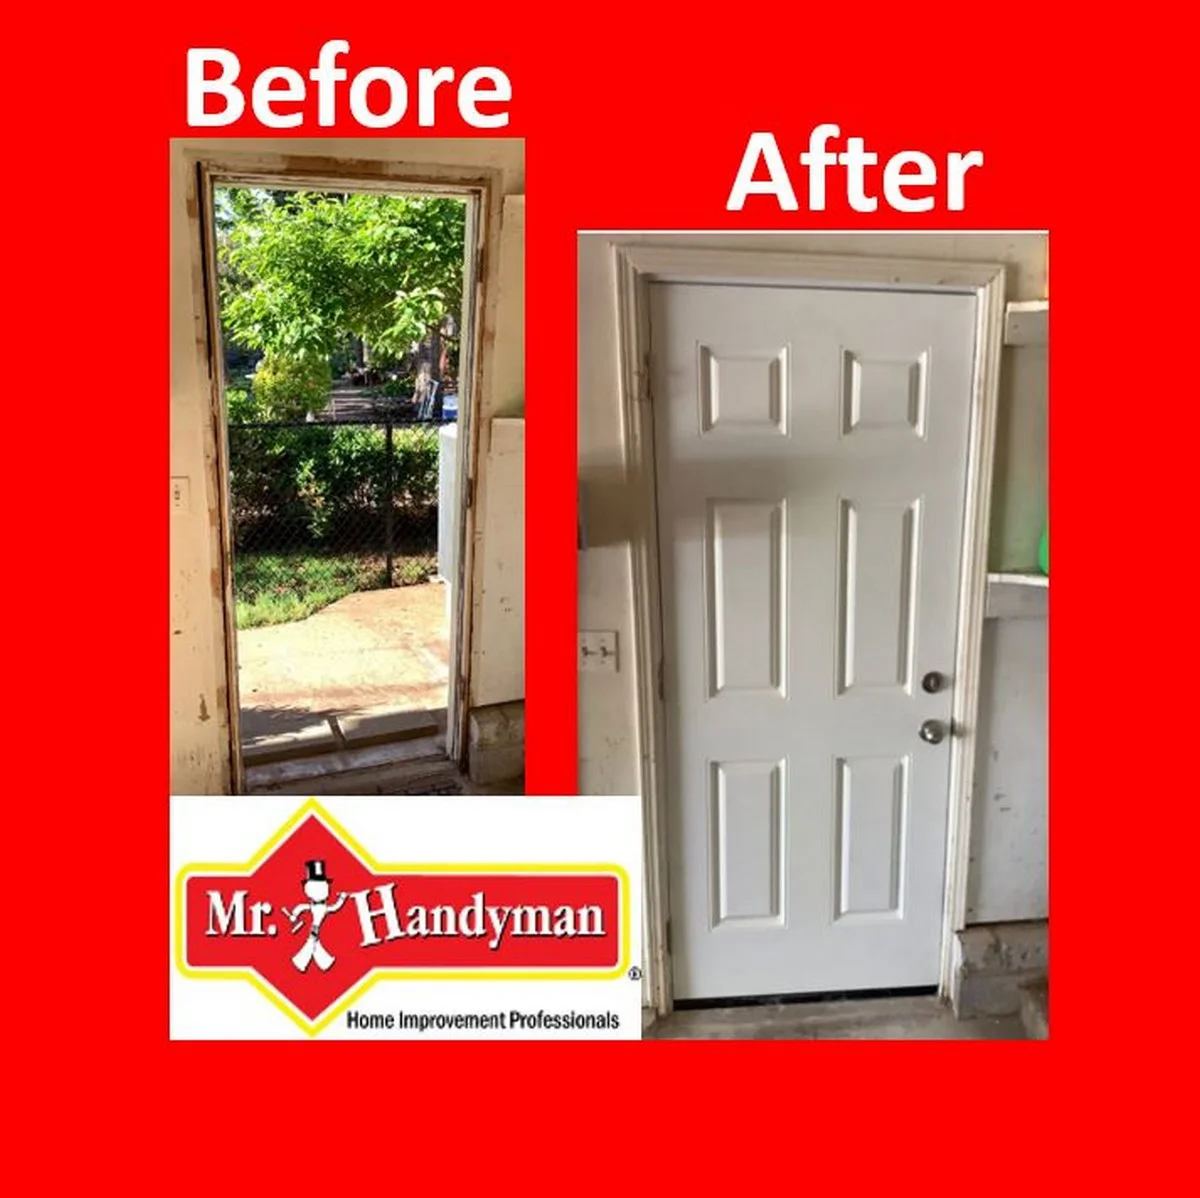 An exterior doorway before and after the frame and door have been replaced and refinished by Mr. Handyman.